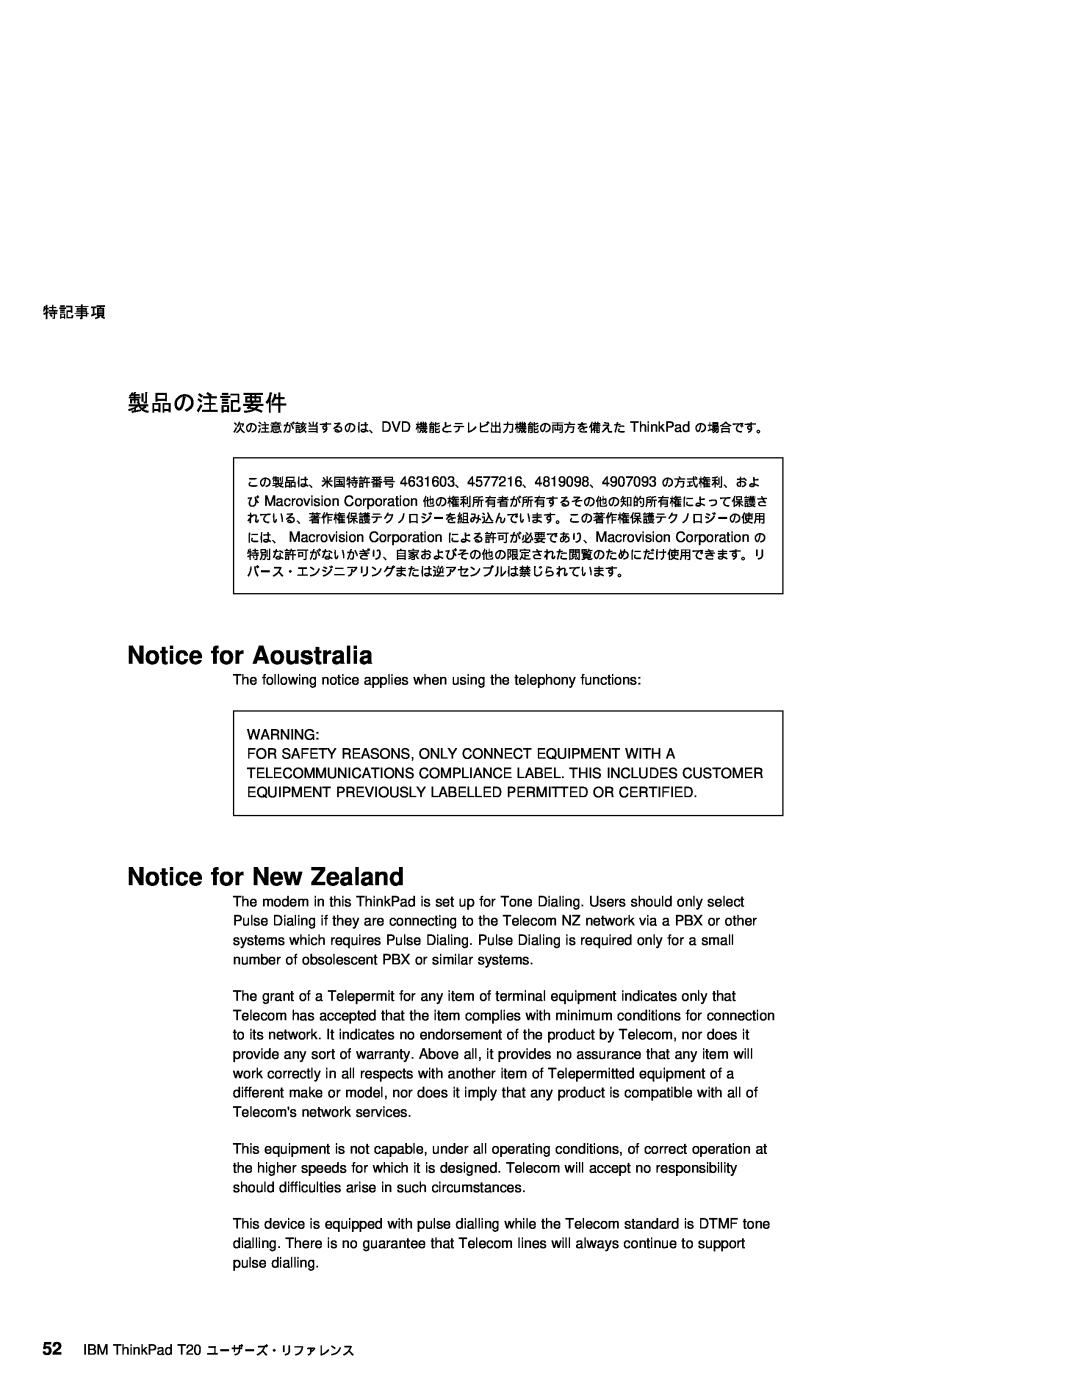 IBM T20 manual Notice for Aoustralia, Notice for New Zealand, 製品の注記要件 